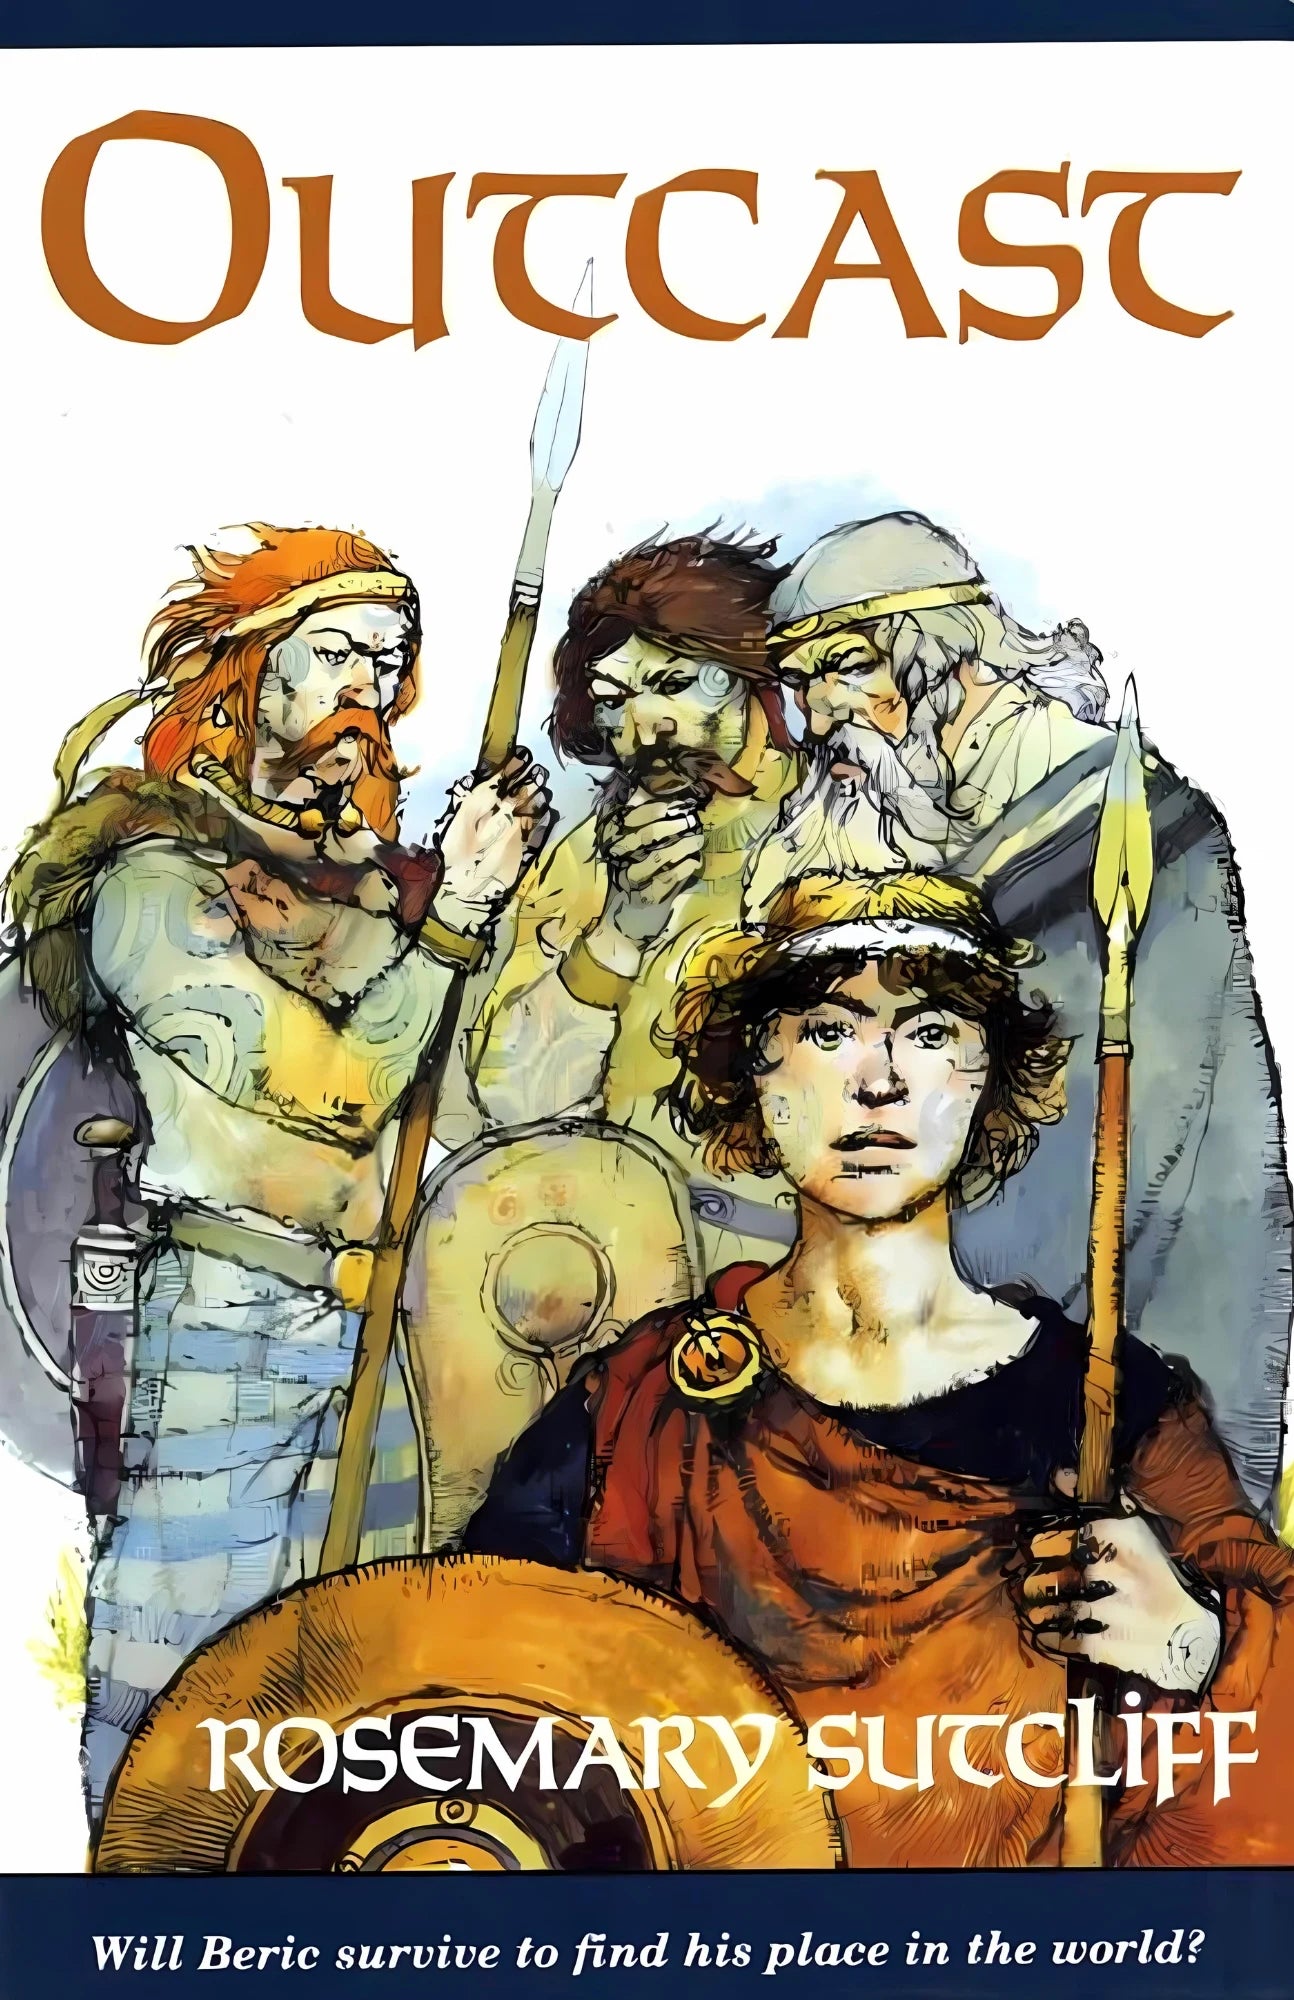 Outcast by Rosemary Sutcliff | Historical Fiction - Alder & Alouette